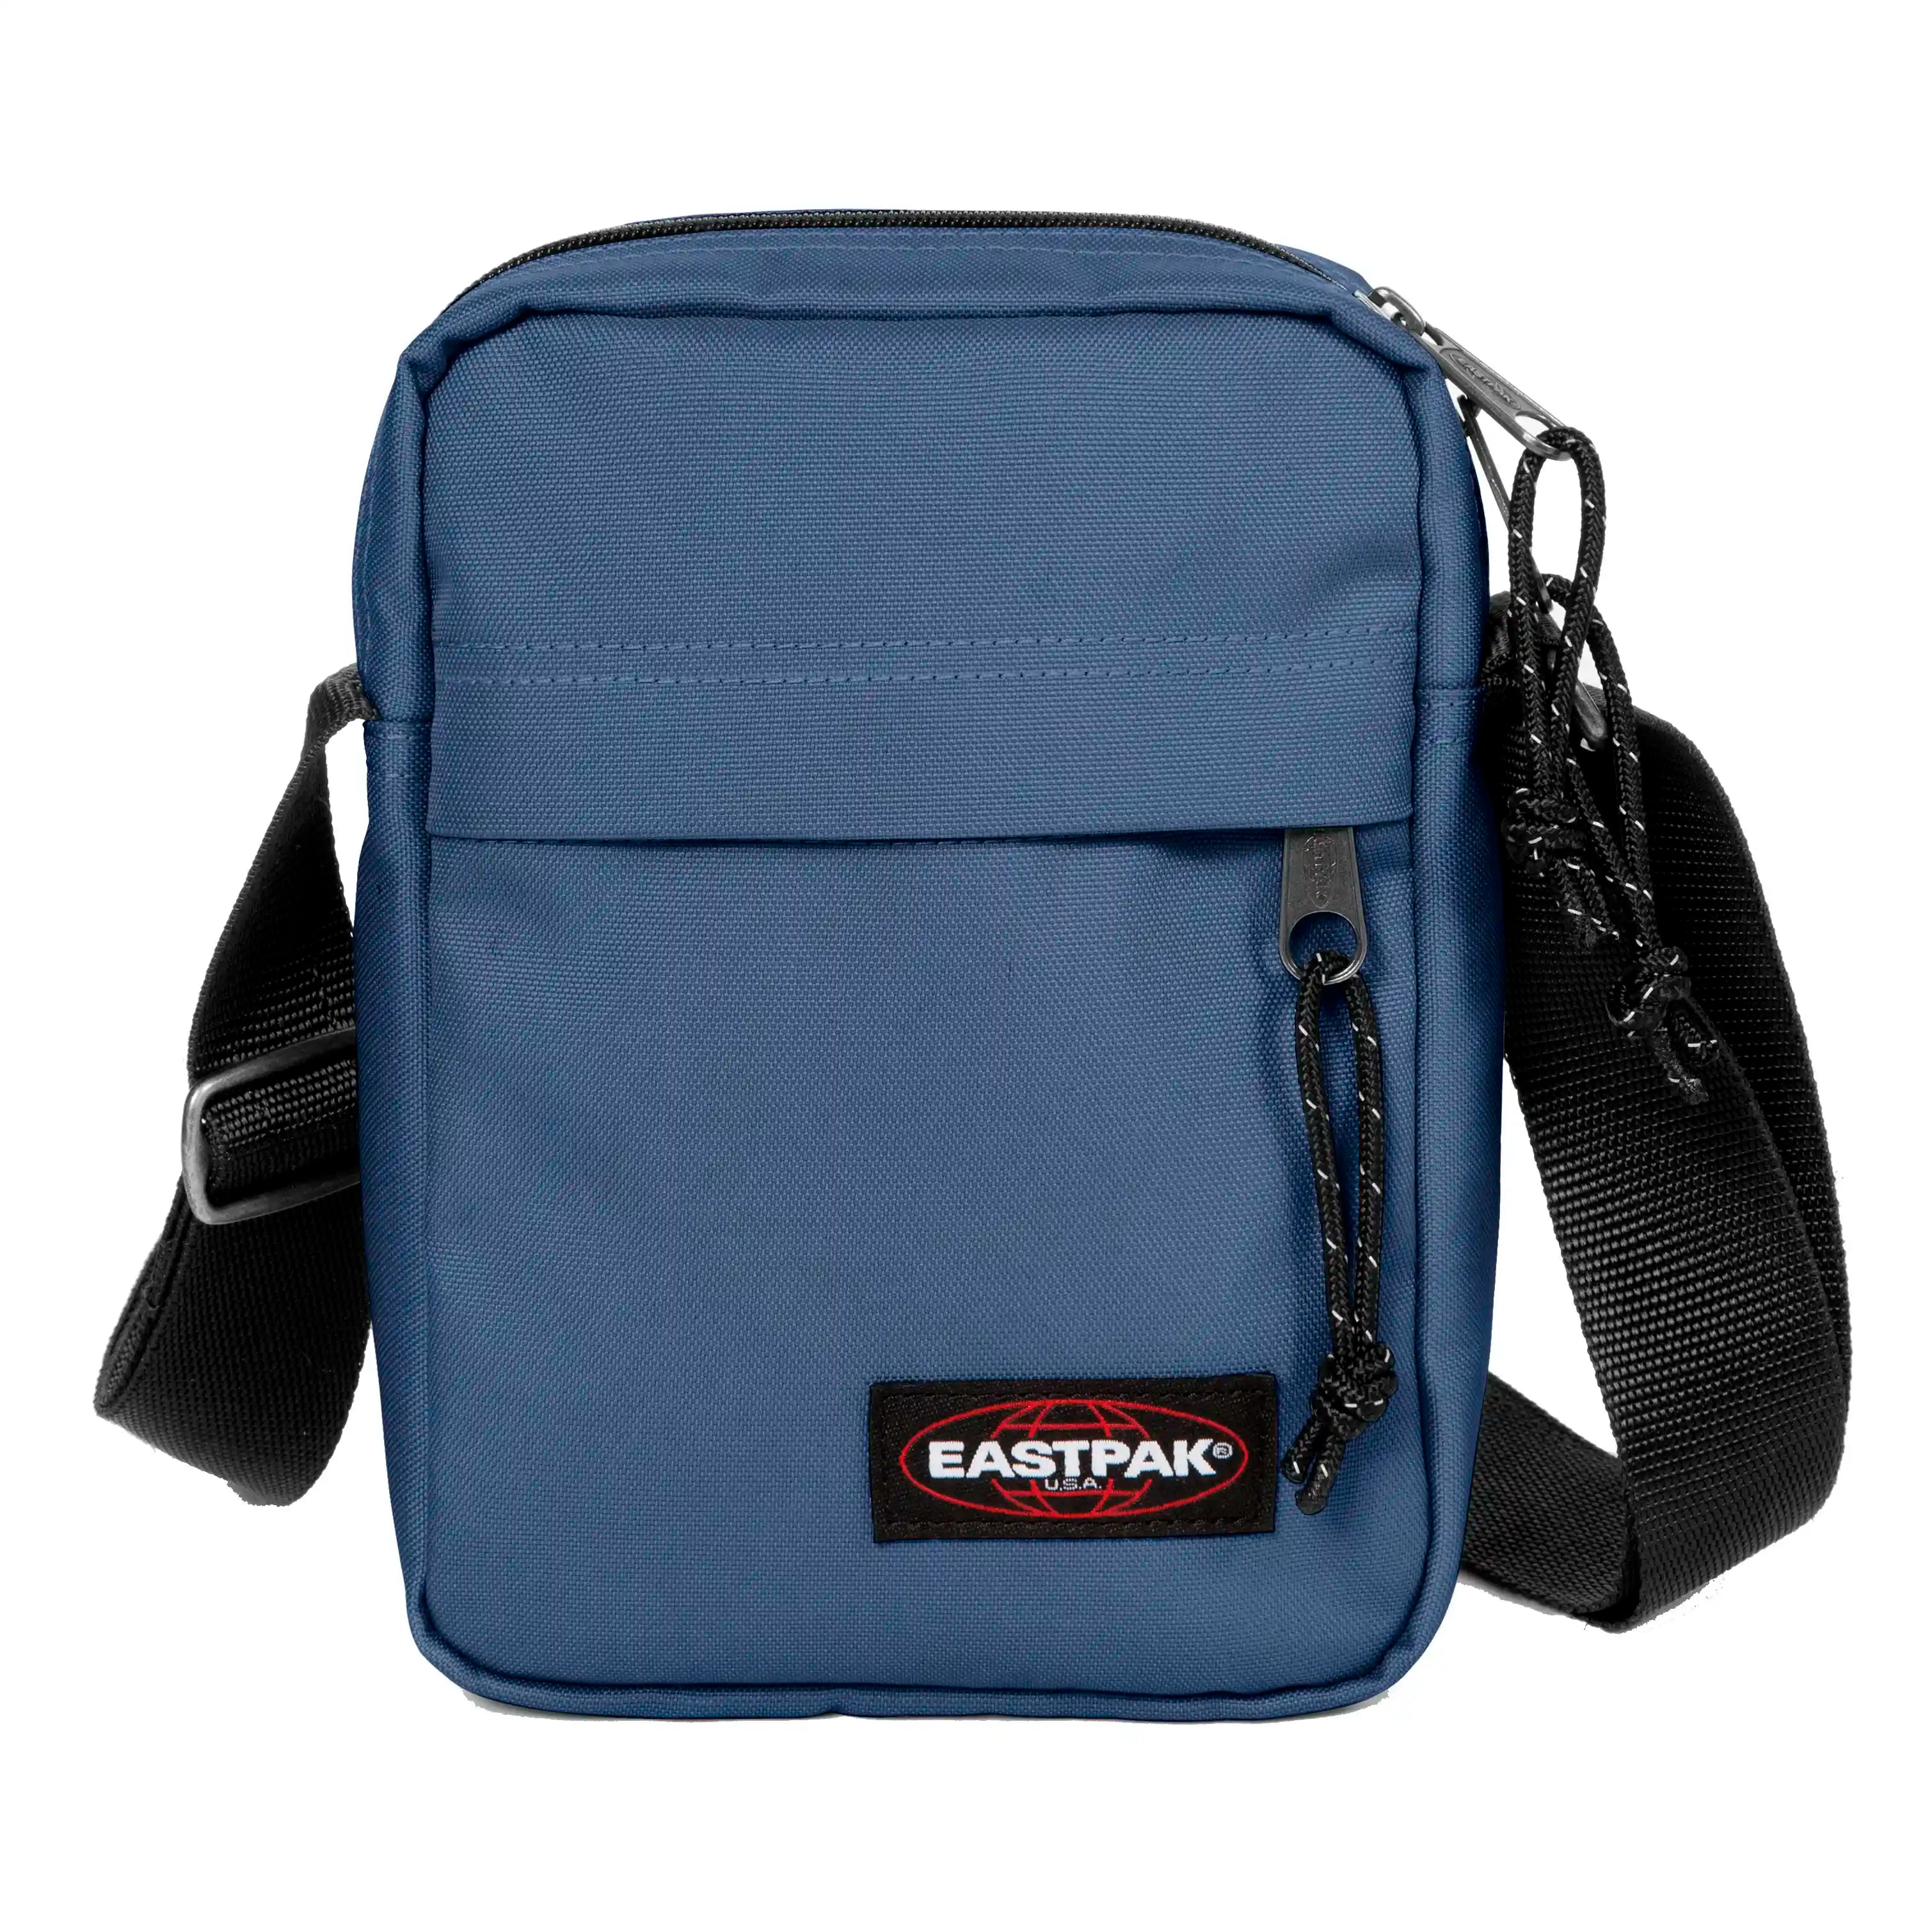 Eastpak Authentic The One Youth Bag 21 cm - Powder Pilot